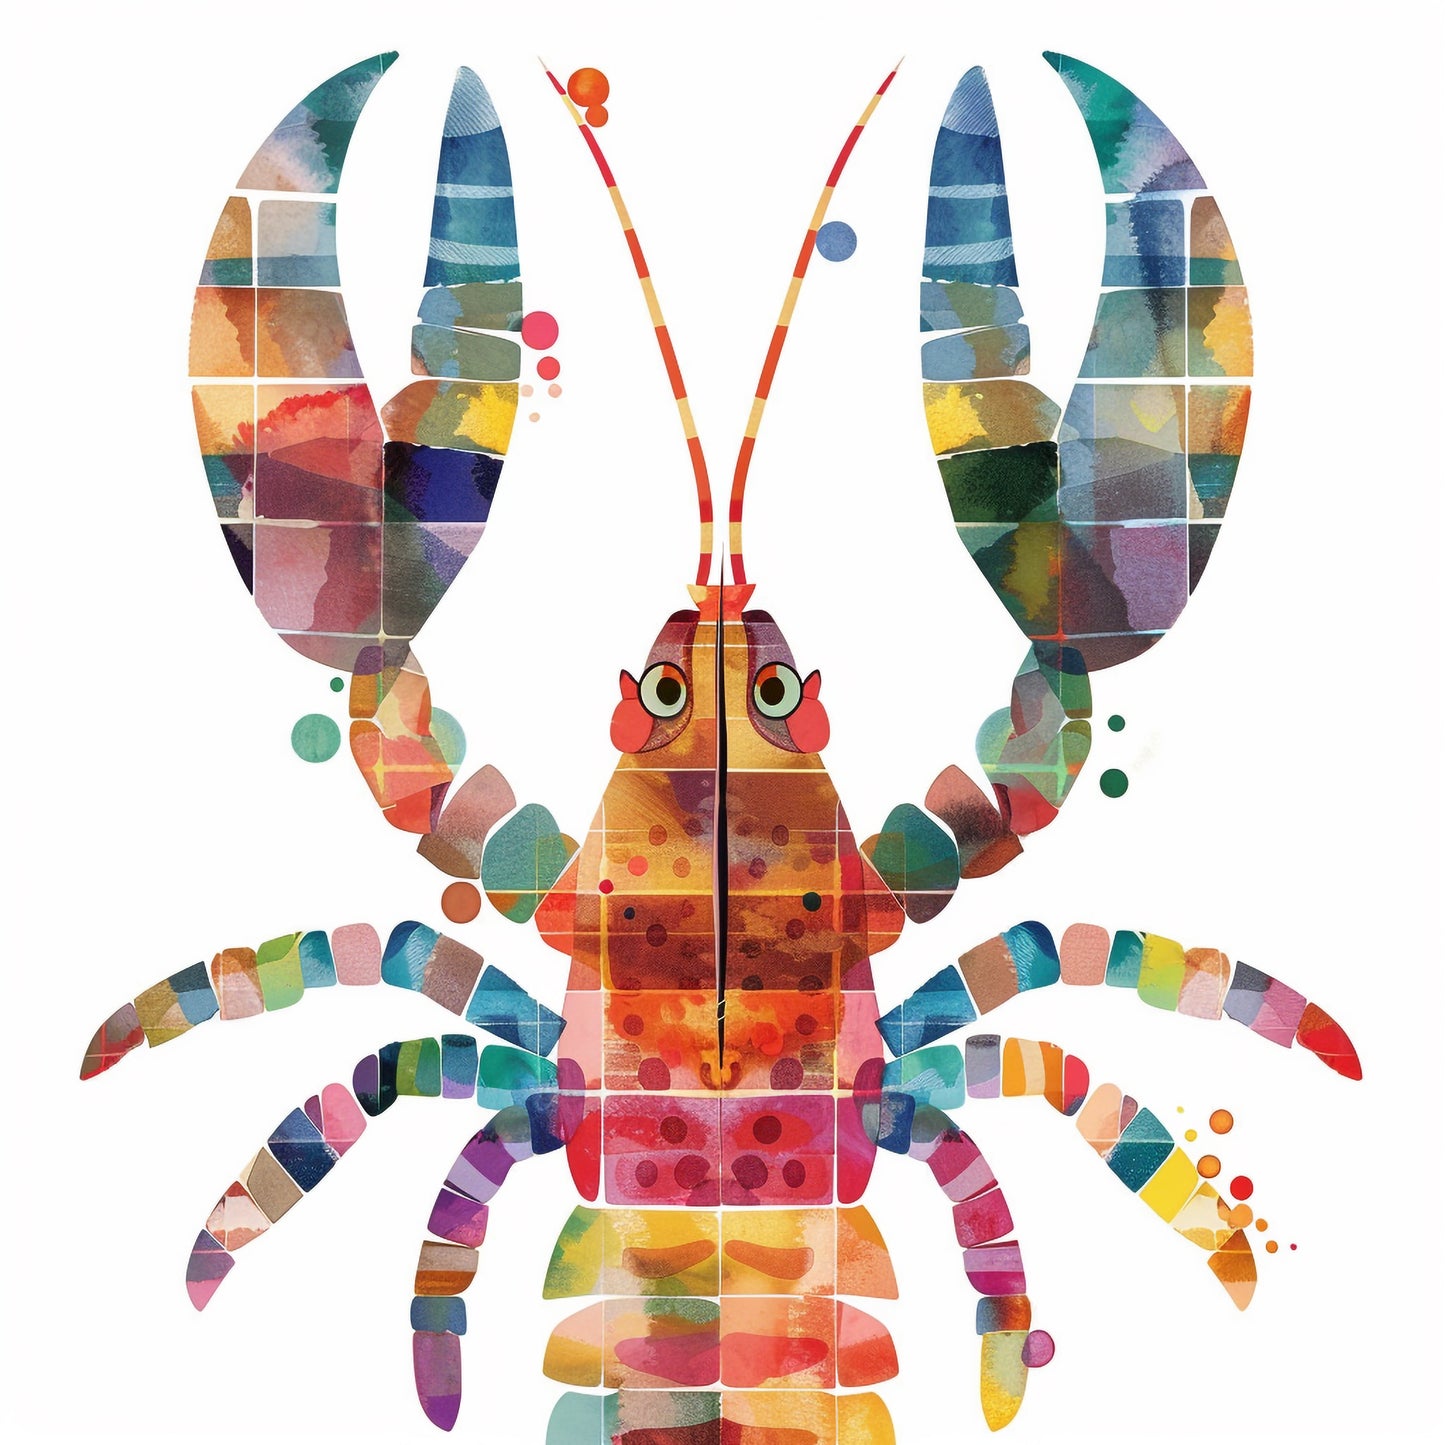 Colorful Watercolor Lobster Illustration on White Background